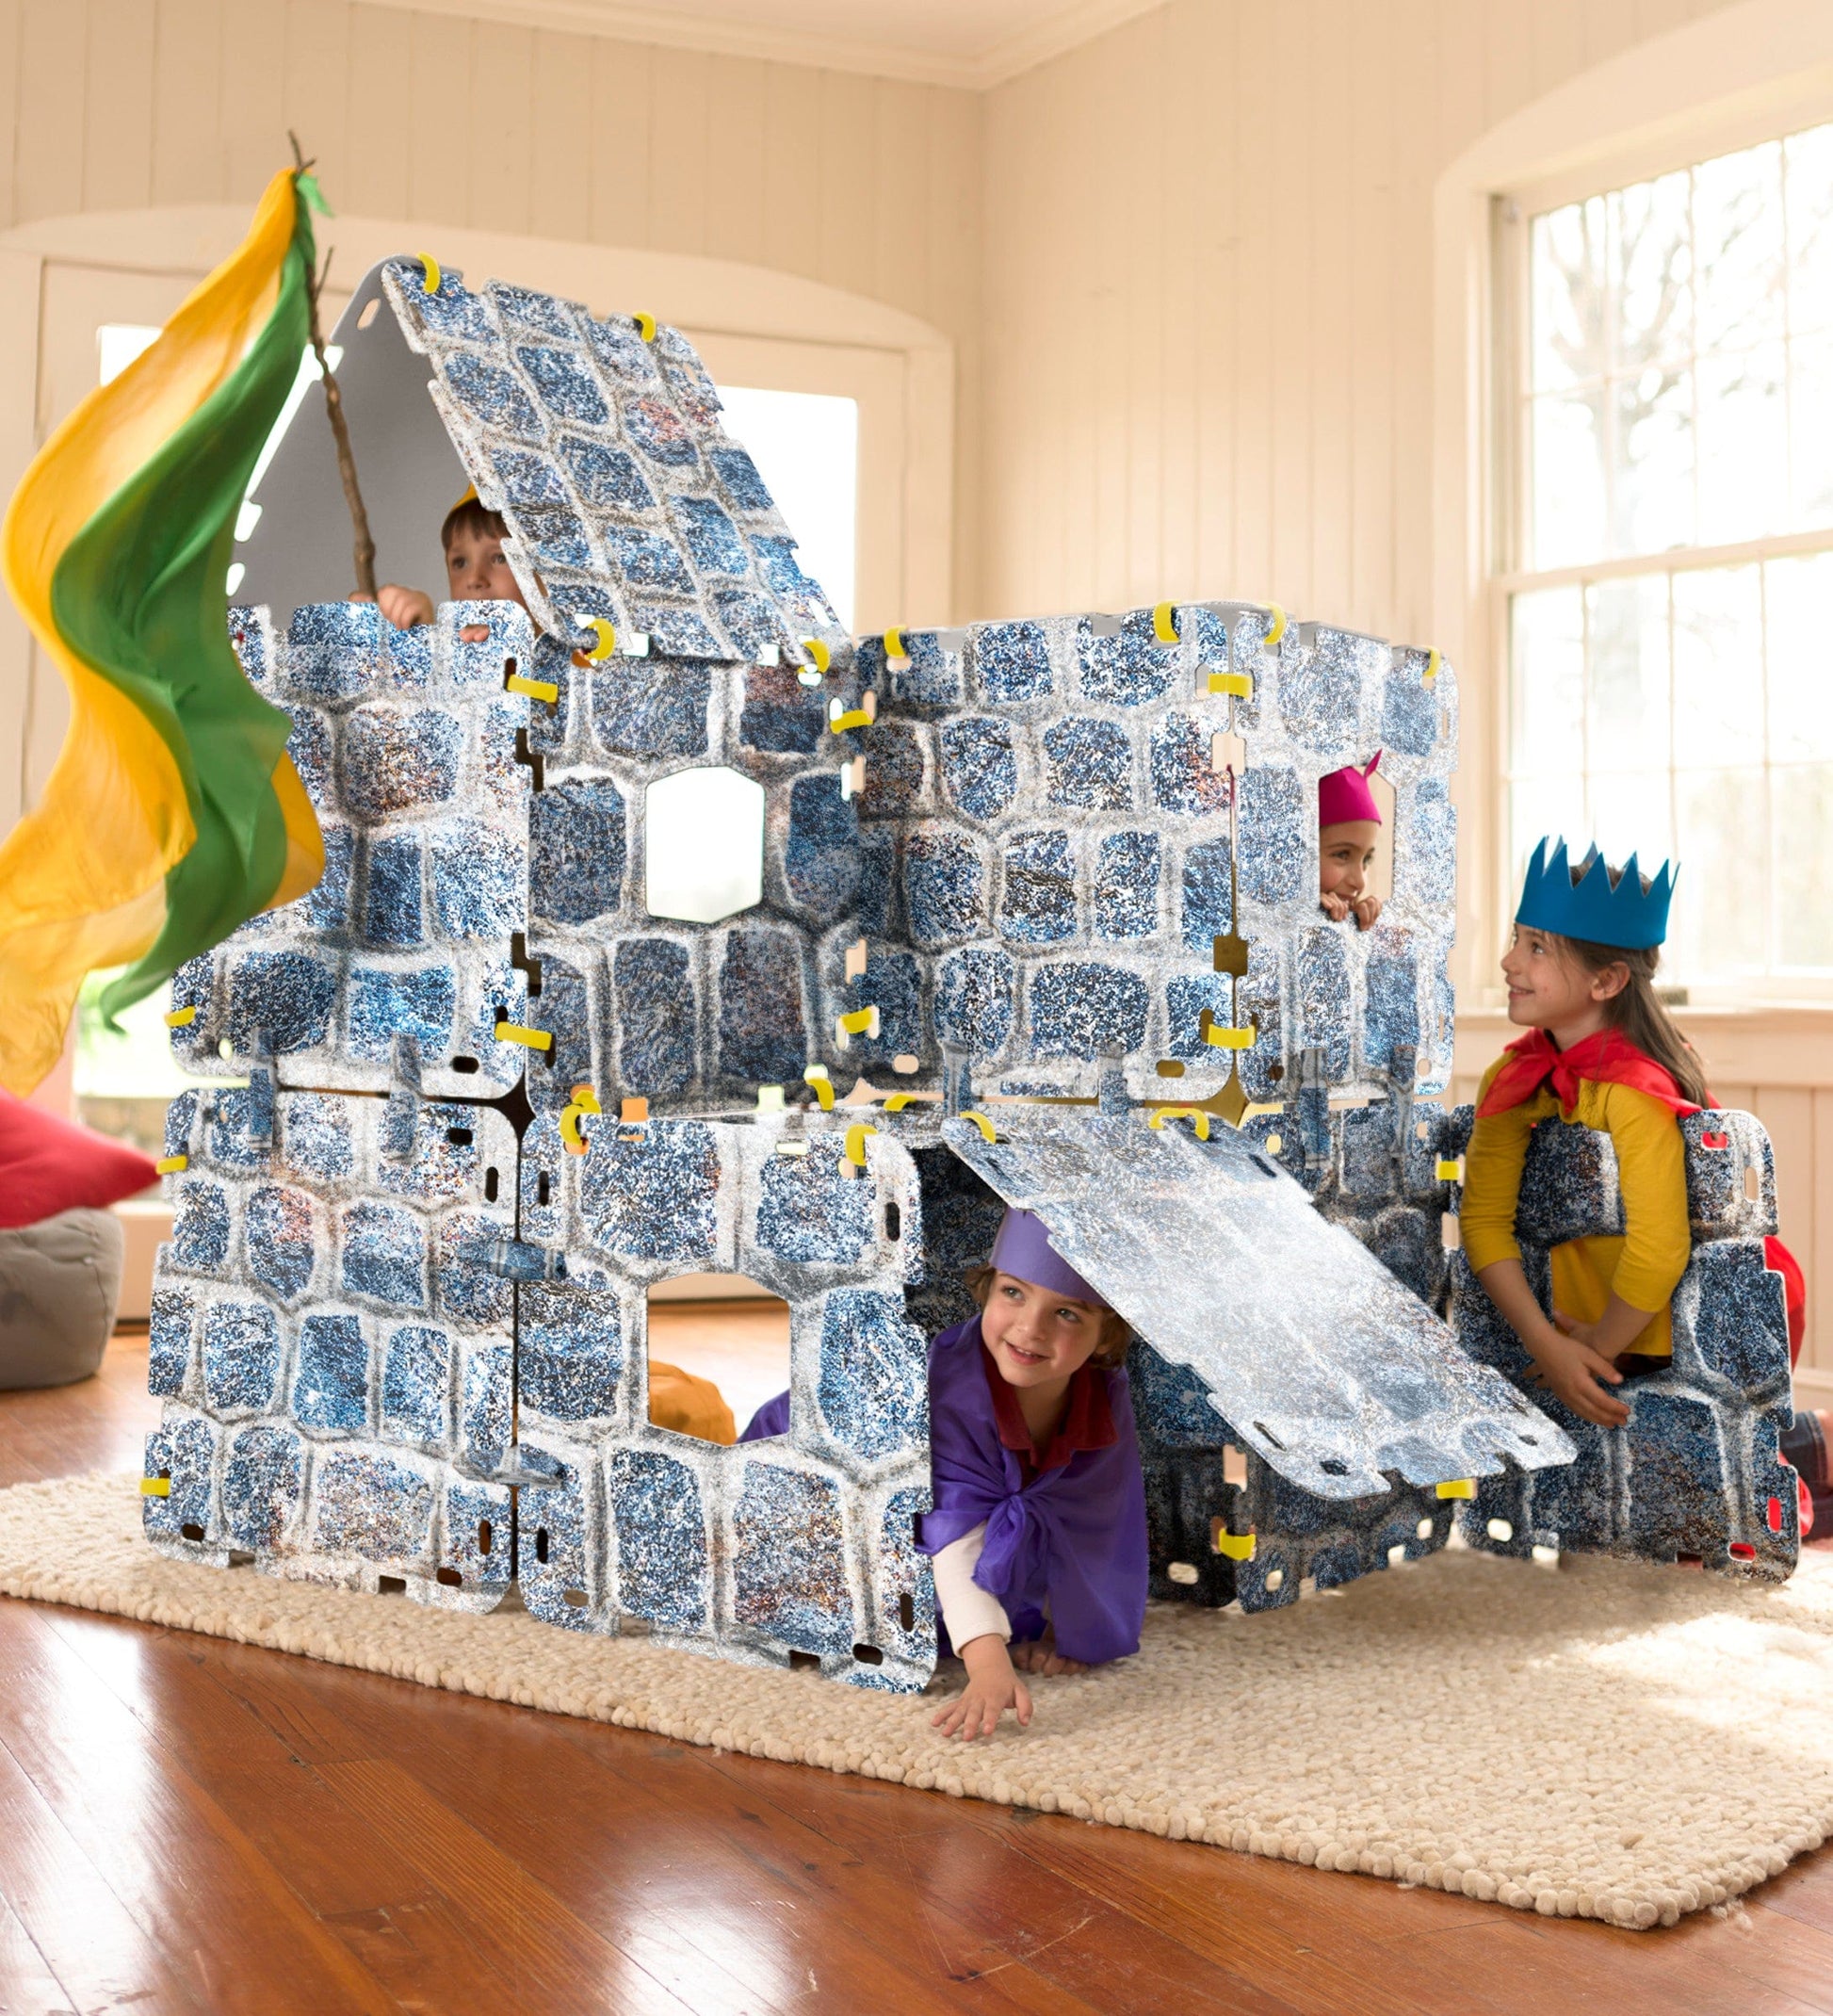 Kids forts building kit Construction Fortress Child Game Tents Fort